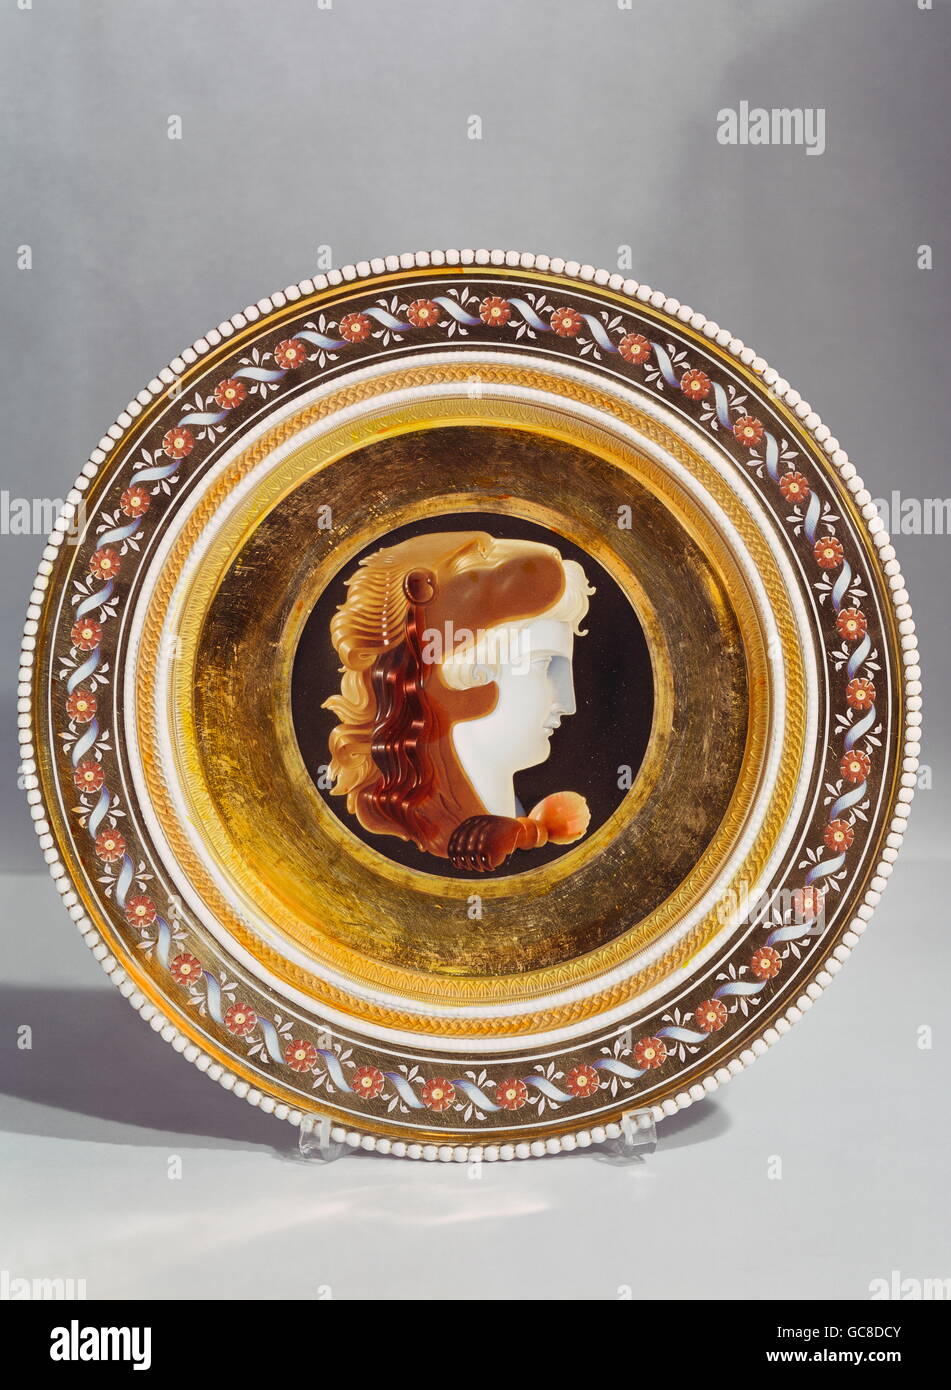 fine arts, porcellain, plate with motive of copied intaglio with head of Alexander the Great, Berlin Manufacture, Germany, circa 1830, porcellain collection of Munich Residence, Stock Photo